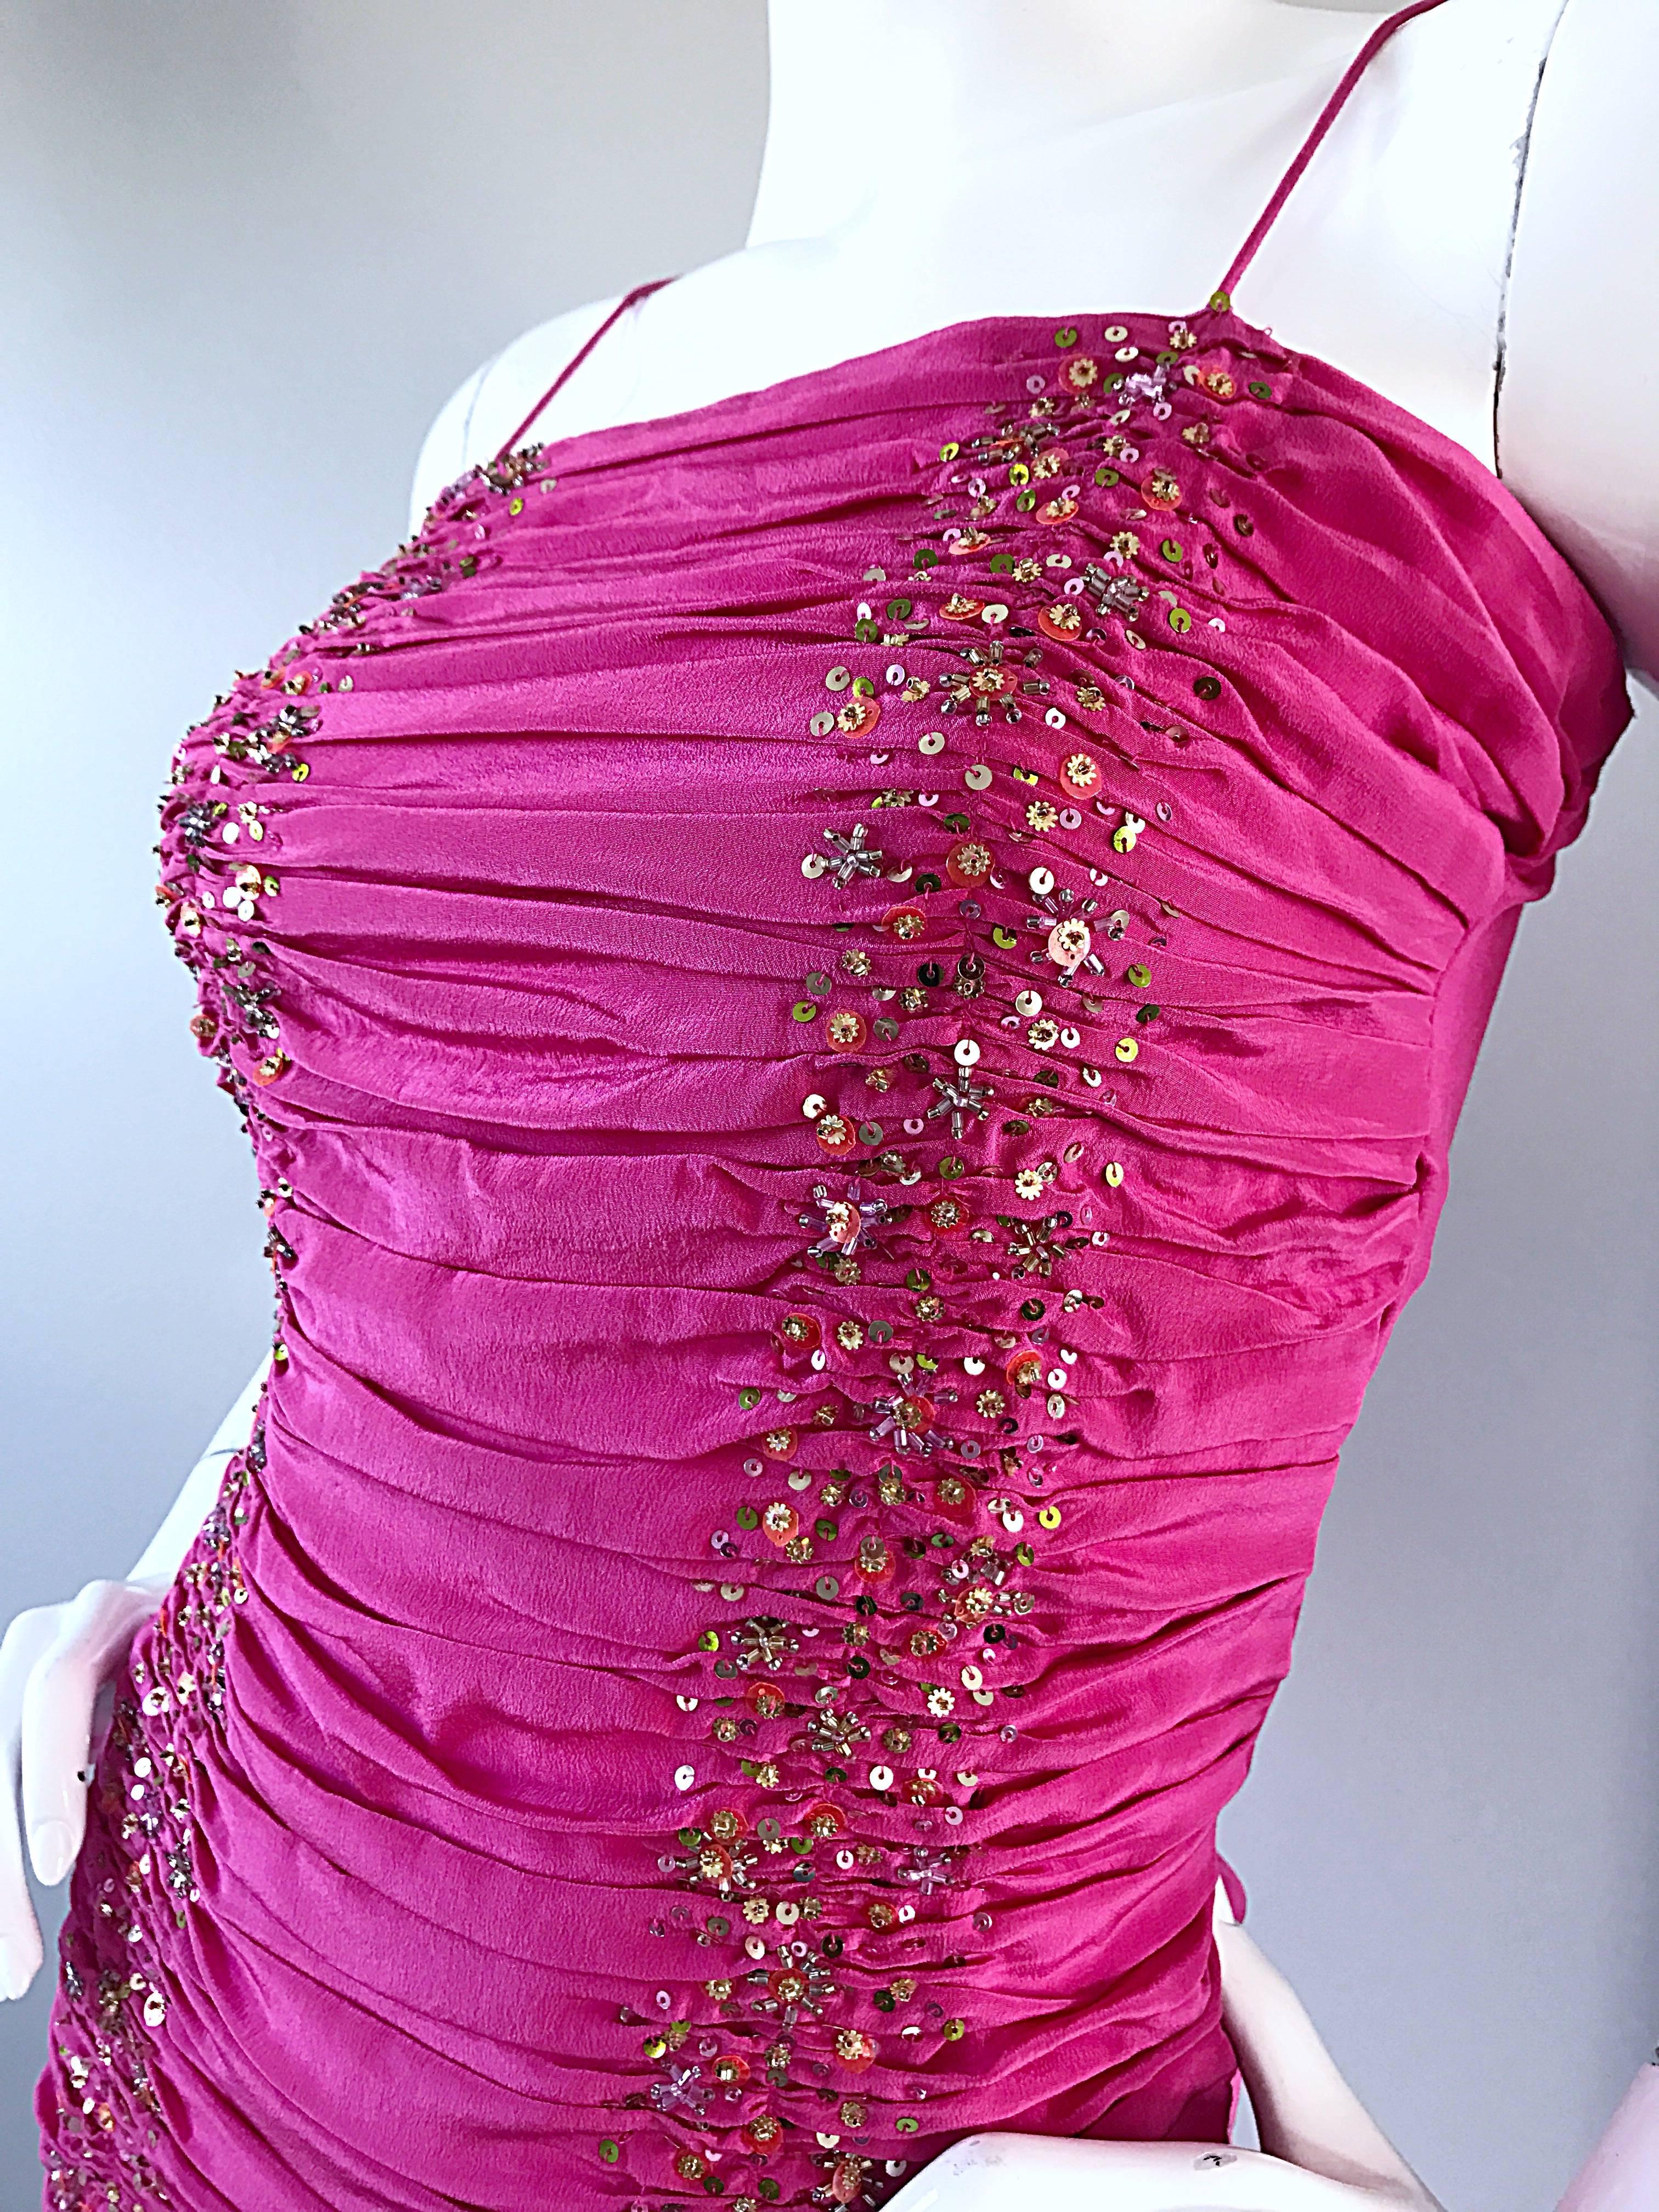 Women's Payal Singhal First Collection c. 1999 Hot Pink Fuchsia Sequined Ruched Dress For Sale